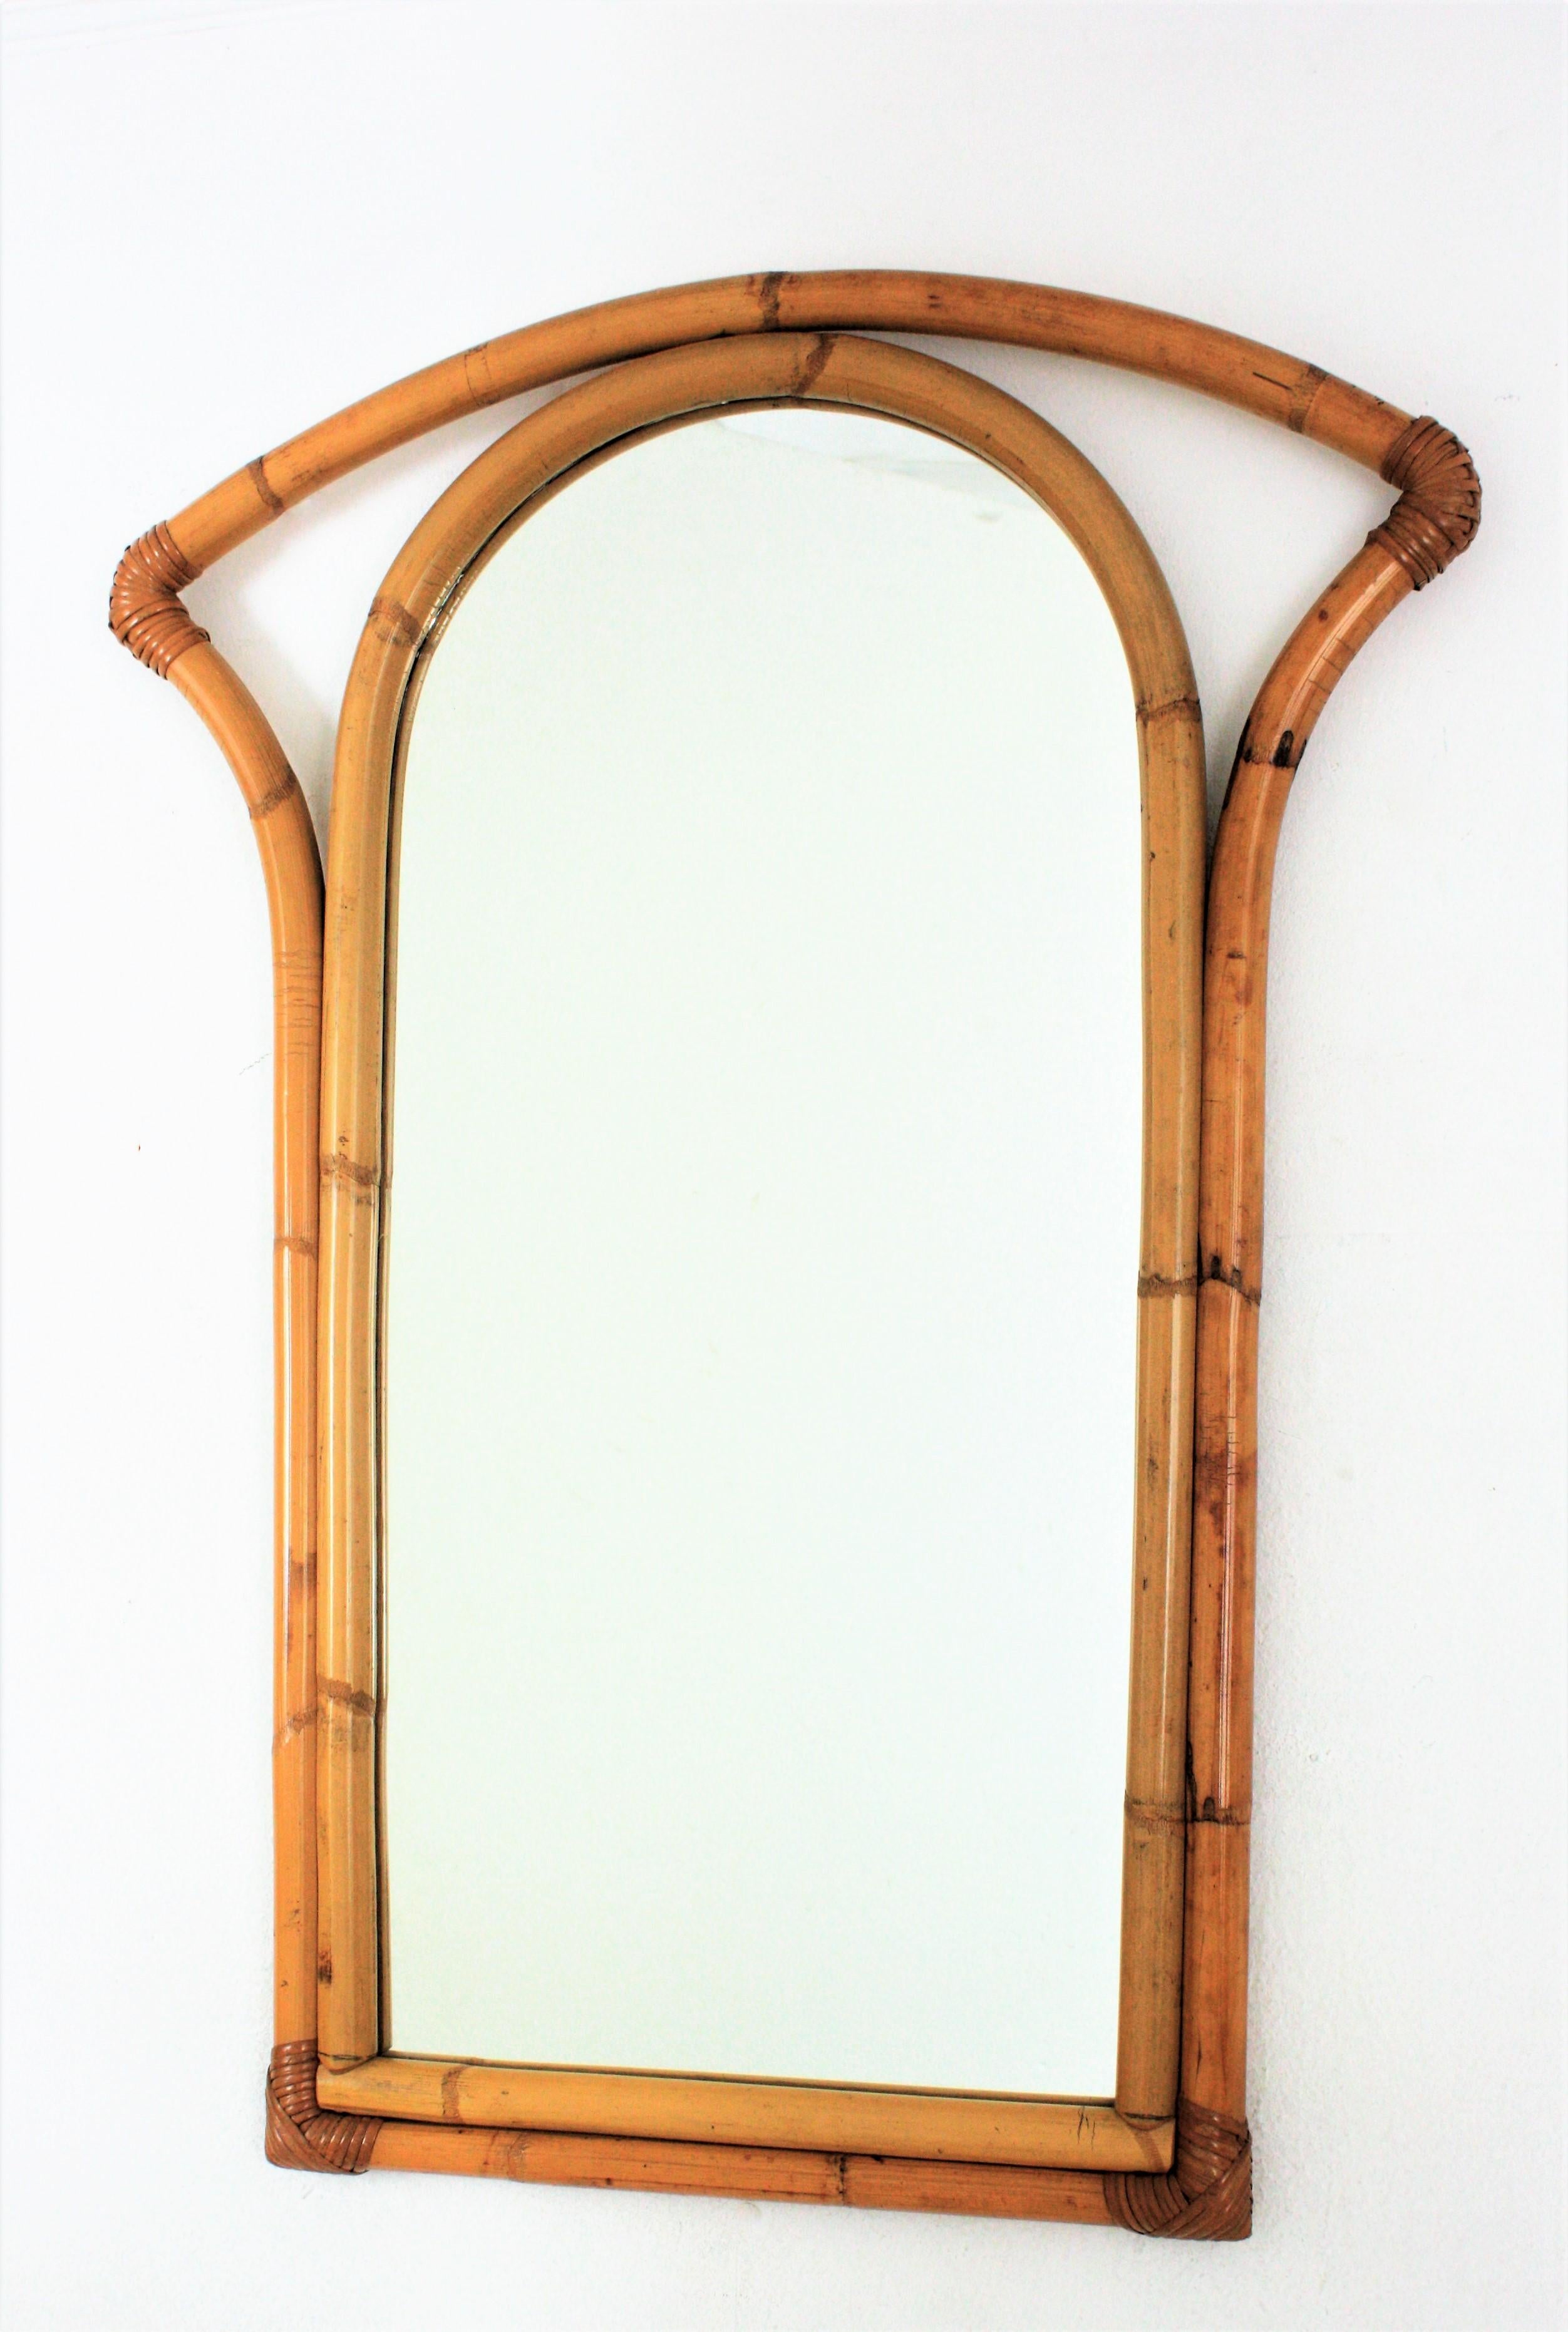 20th Century Spanish 1960s Bamboo Rattan Rectangular Mirror with Arched Top For Sale